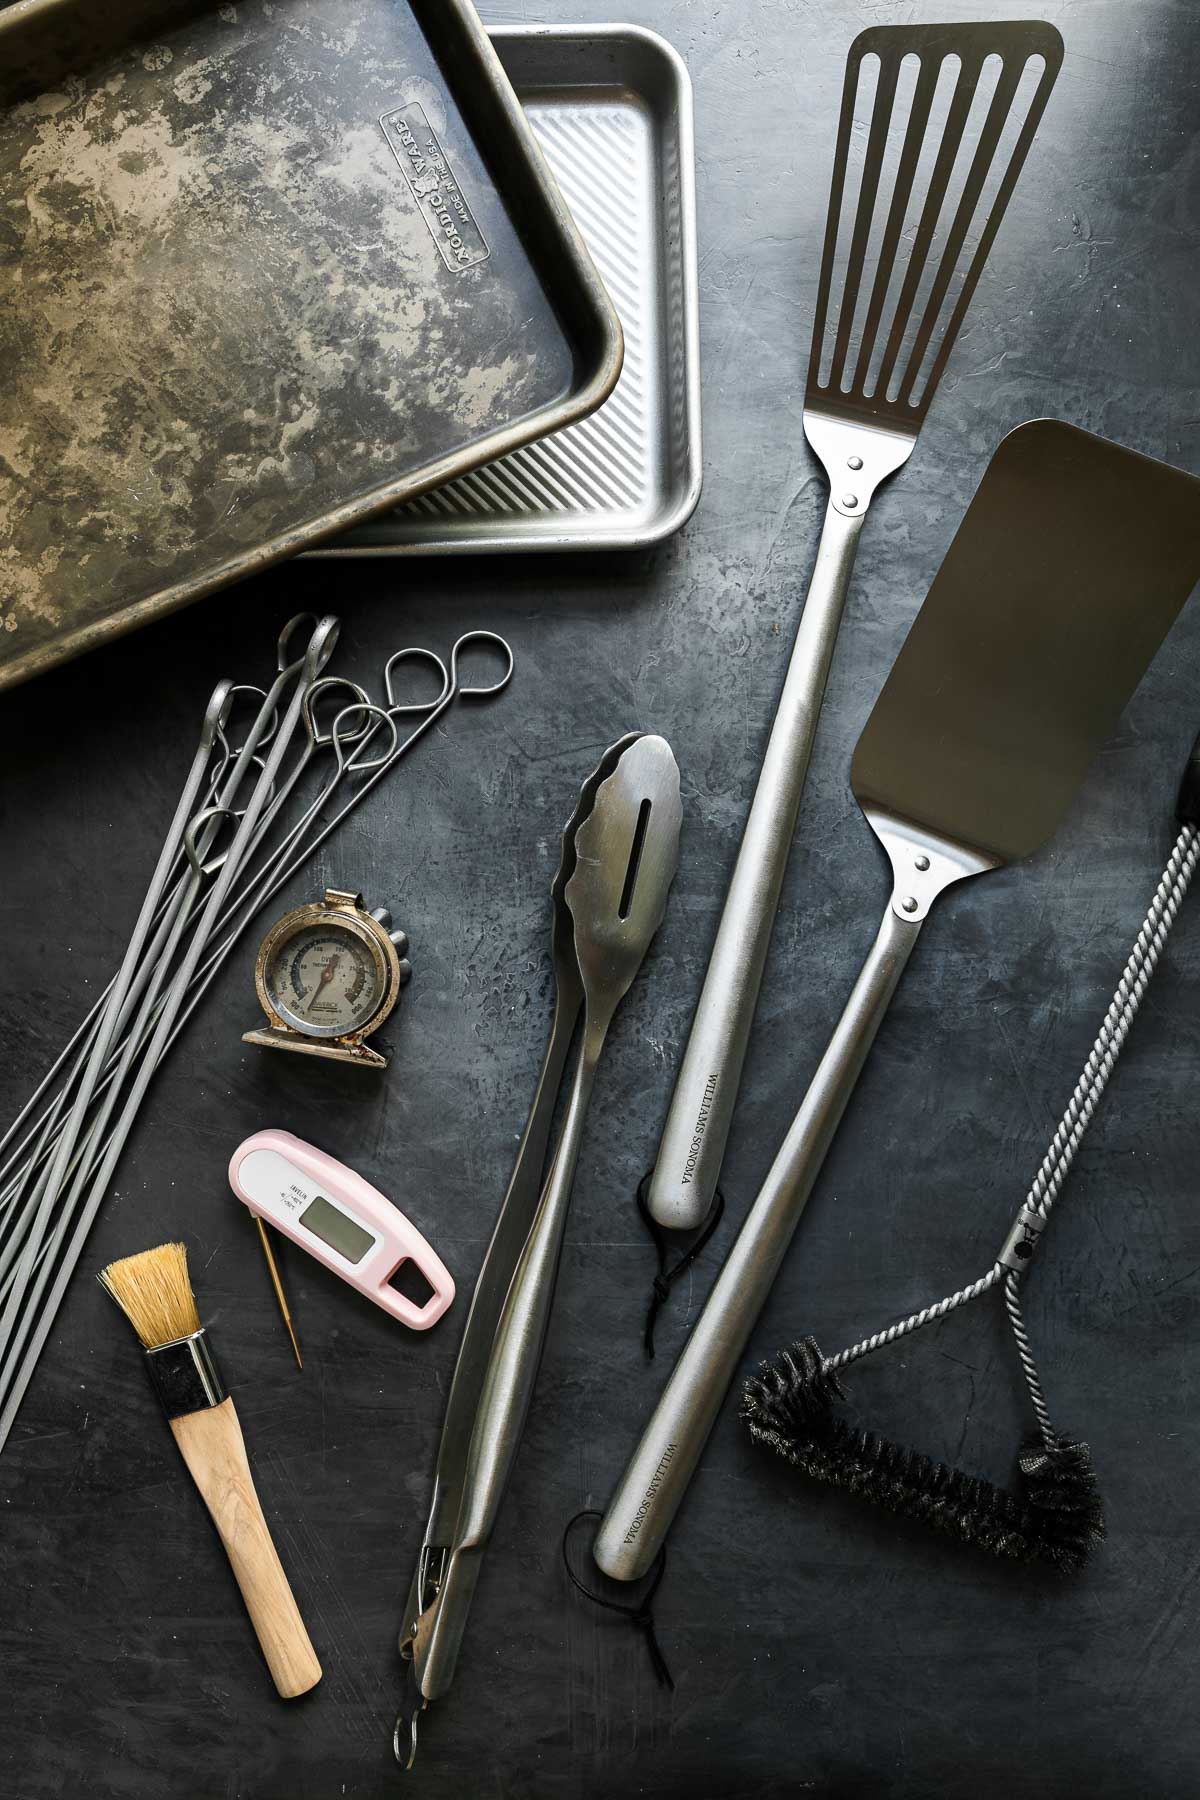 Cooking Articles - Top Must-Have Tools for Grilling